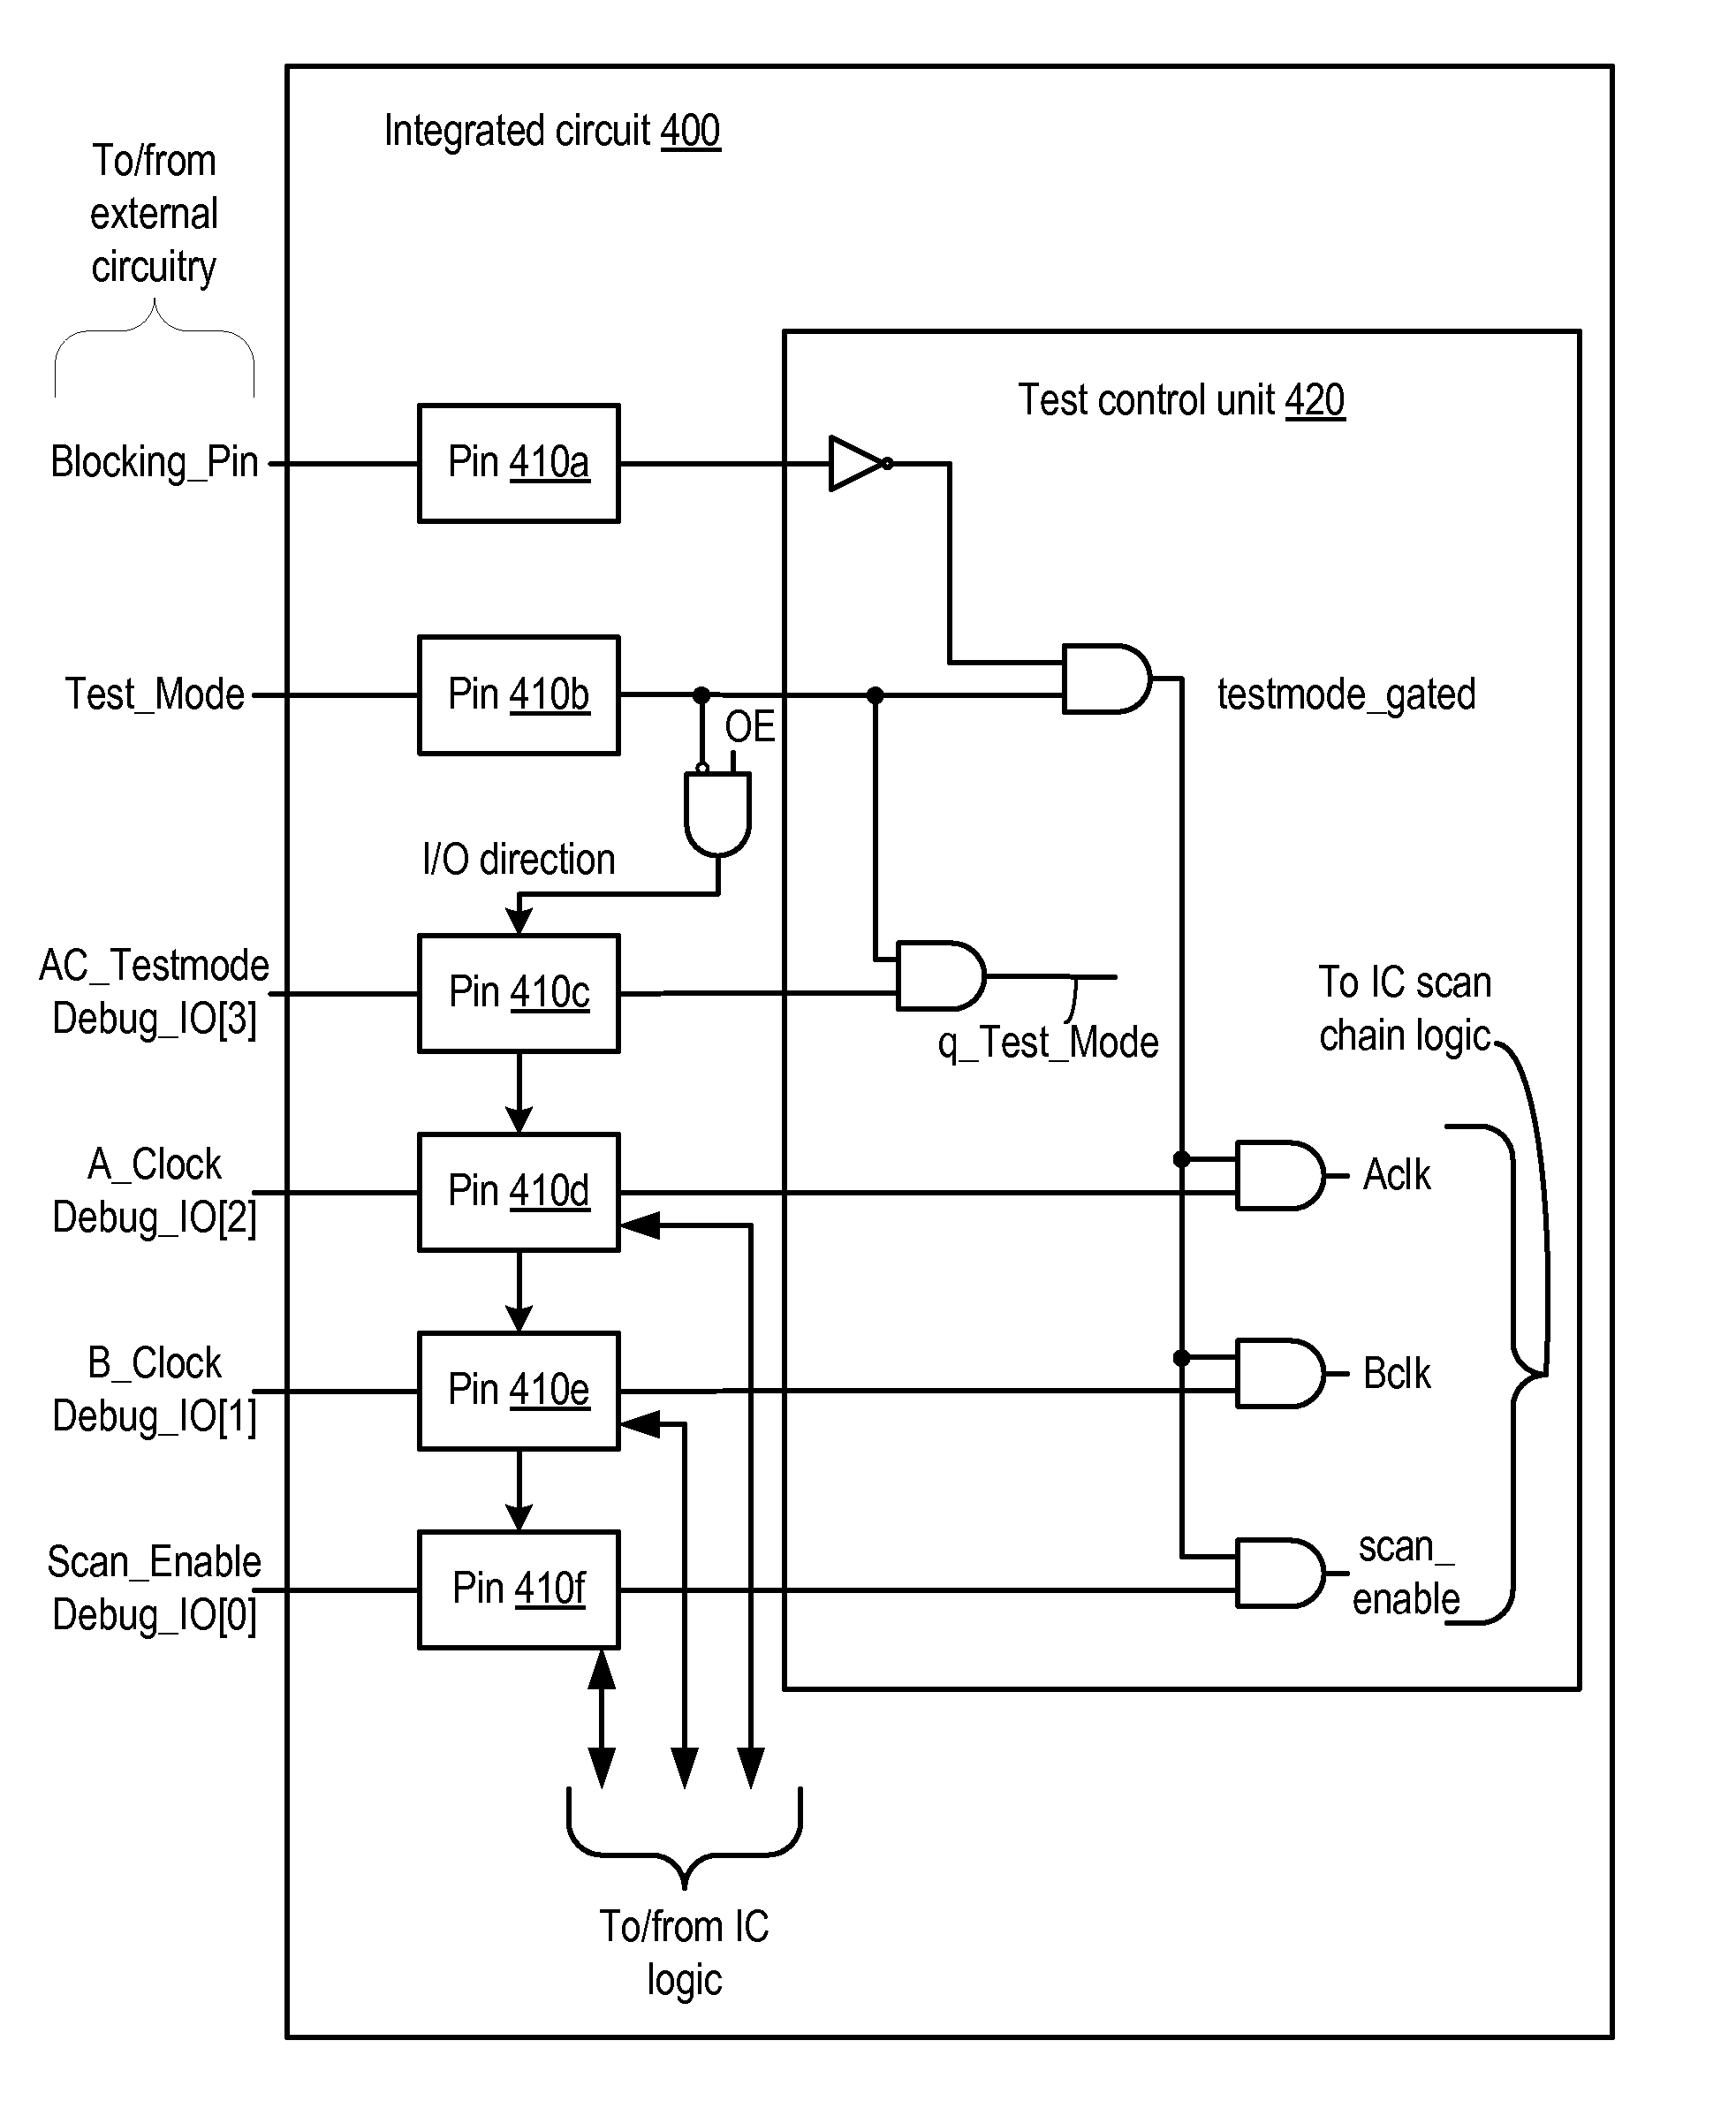 Integrated circuit with blocking pin to coordinate entry into test mode